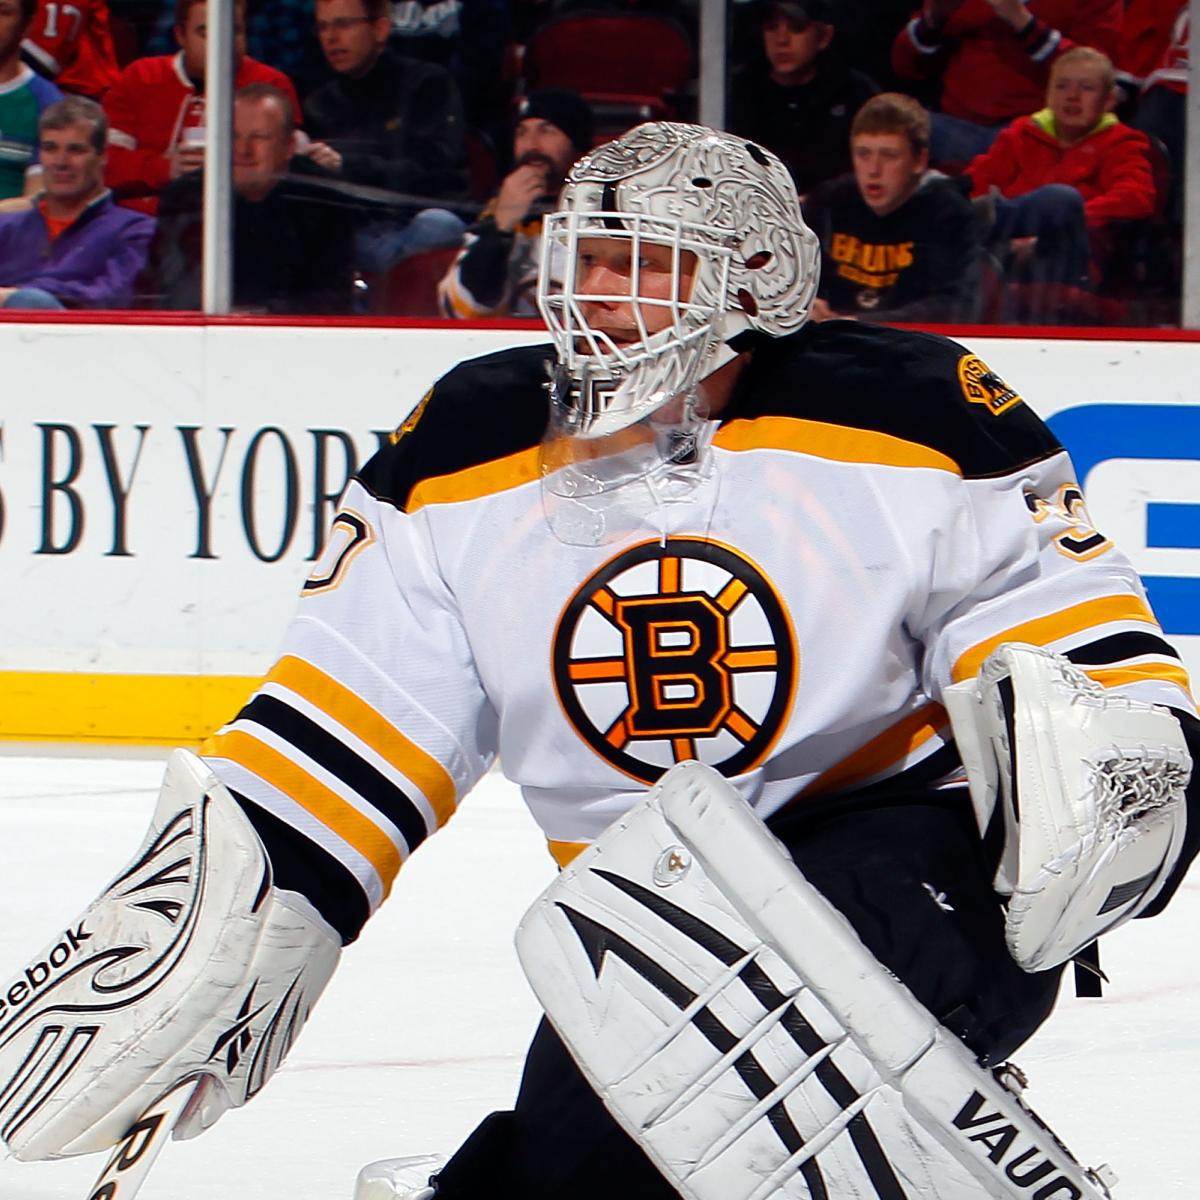 Bruins goalie Tim Thomas waves no-trade clause - Sports Illustrated